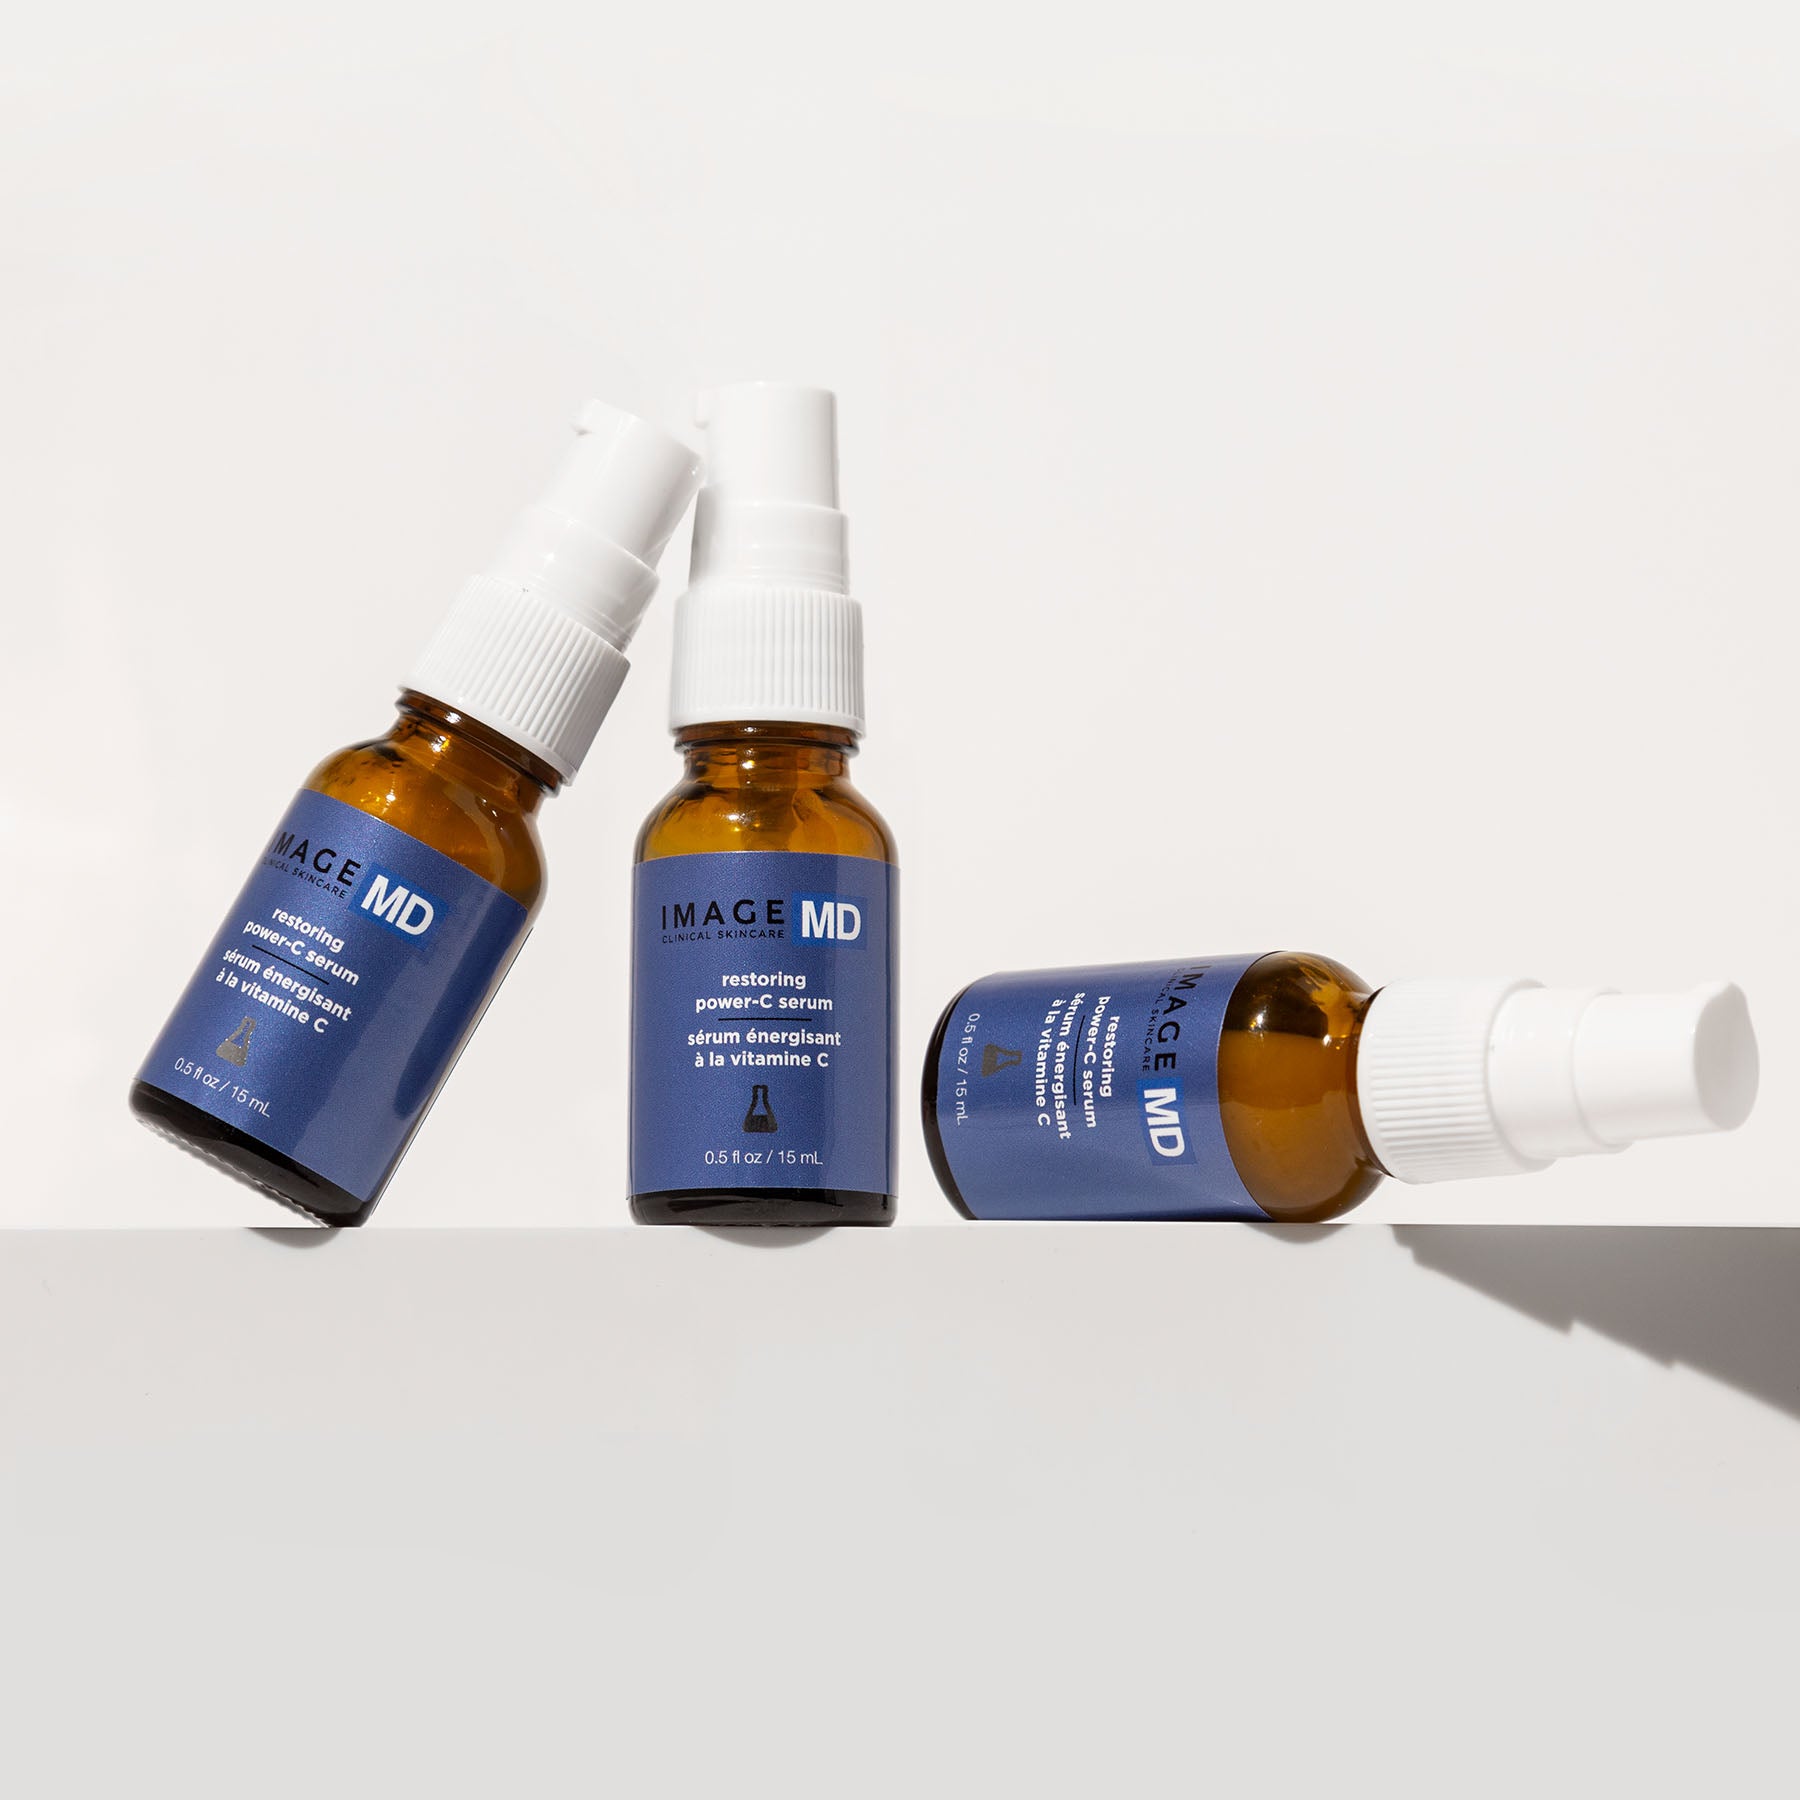 IMAGE MD® restoring power-C serum discovery-size